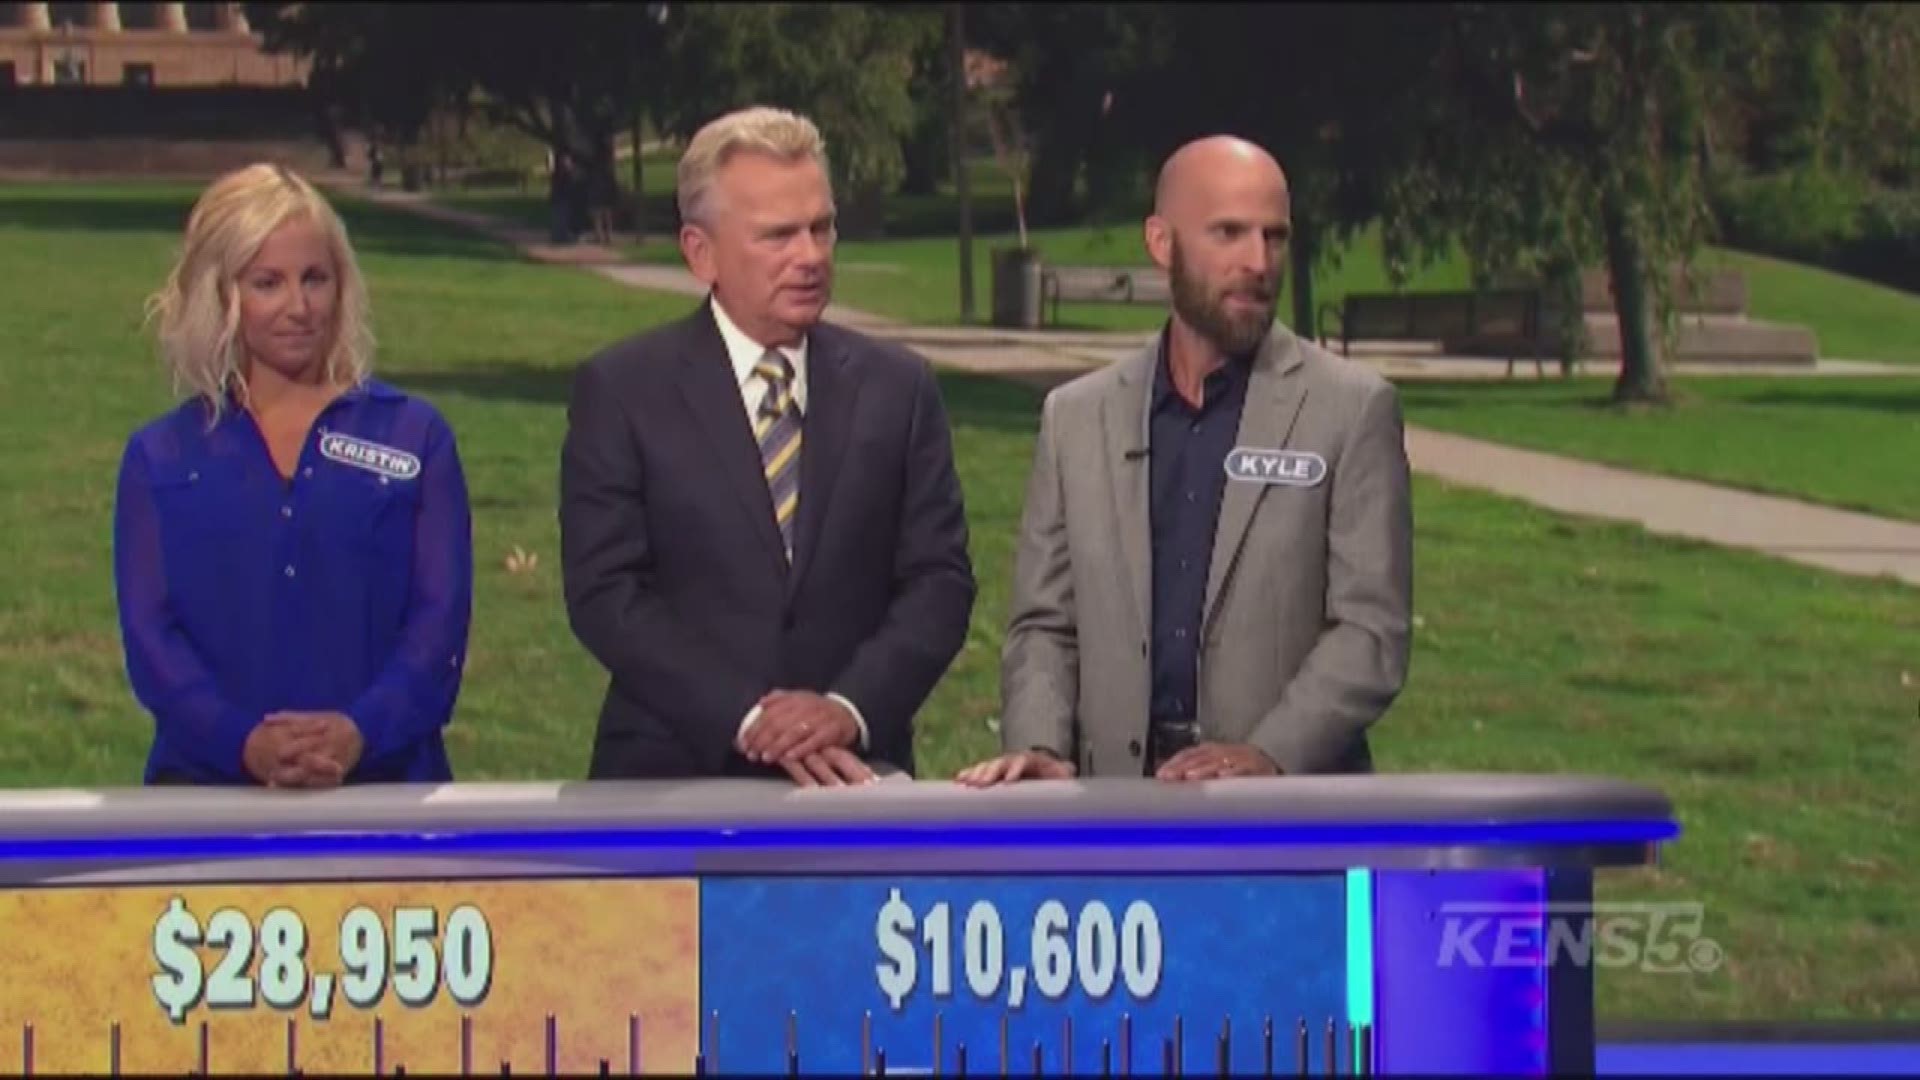 A San Antonio high school teacher is all the buzz nowadays after making an appearance on the hit game show Wheel of Fortune.